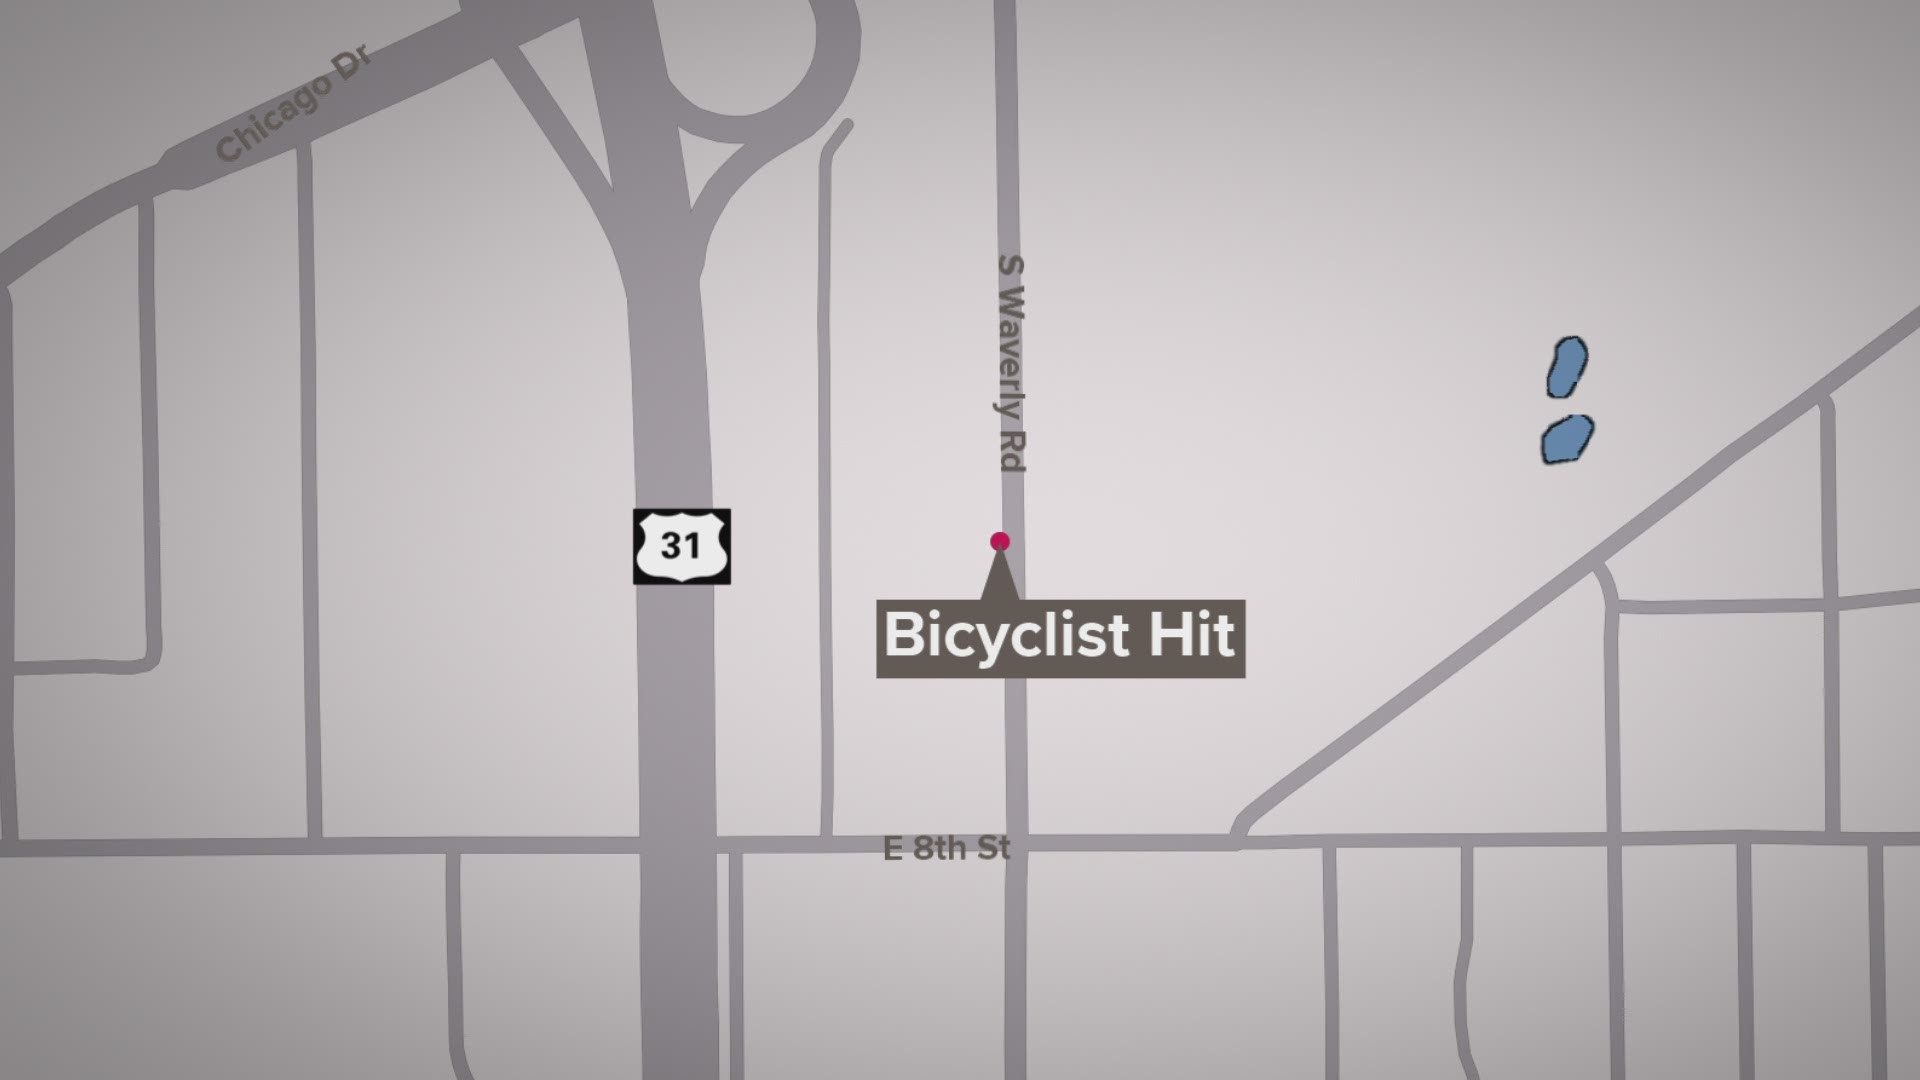 After being hit by the first vehicle, the bicyclist was struck again by a second southbound vehicle.